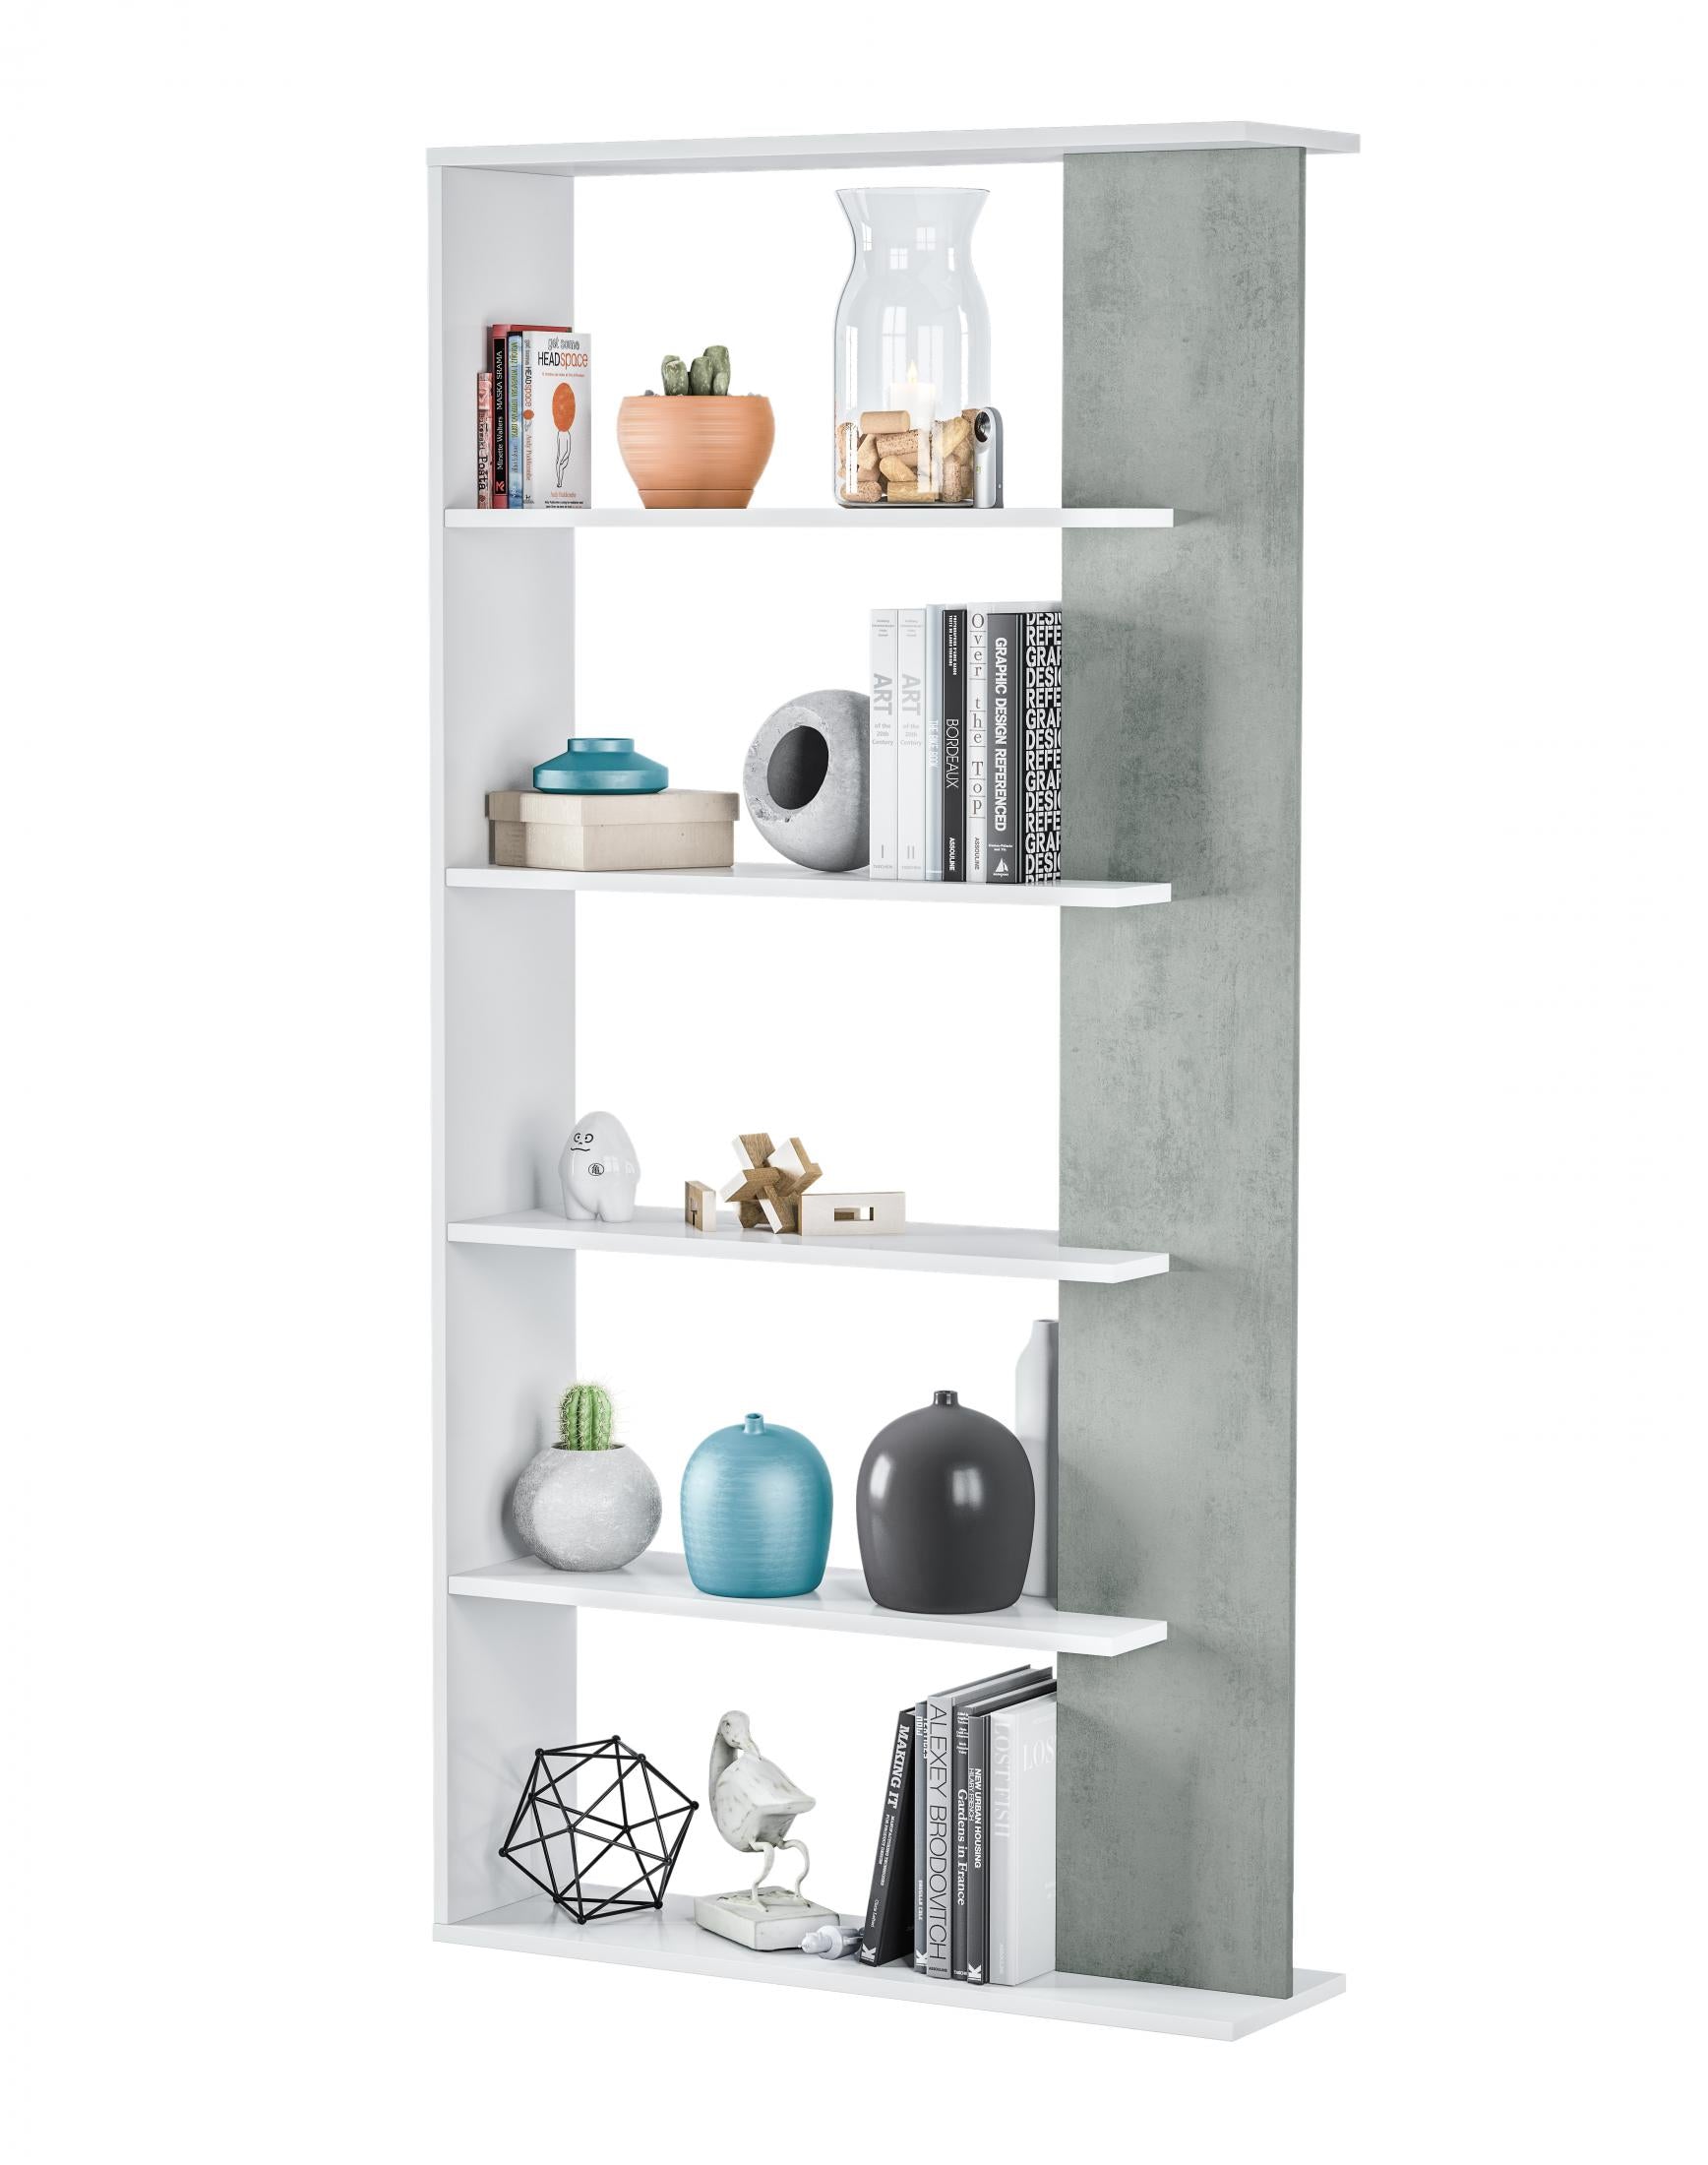 Epping Bookcase Table 5 Shelves White & Concrete 0L2252A